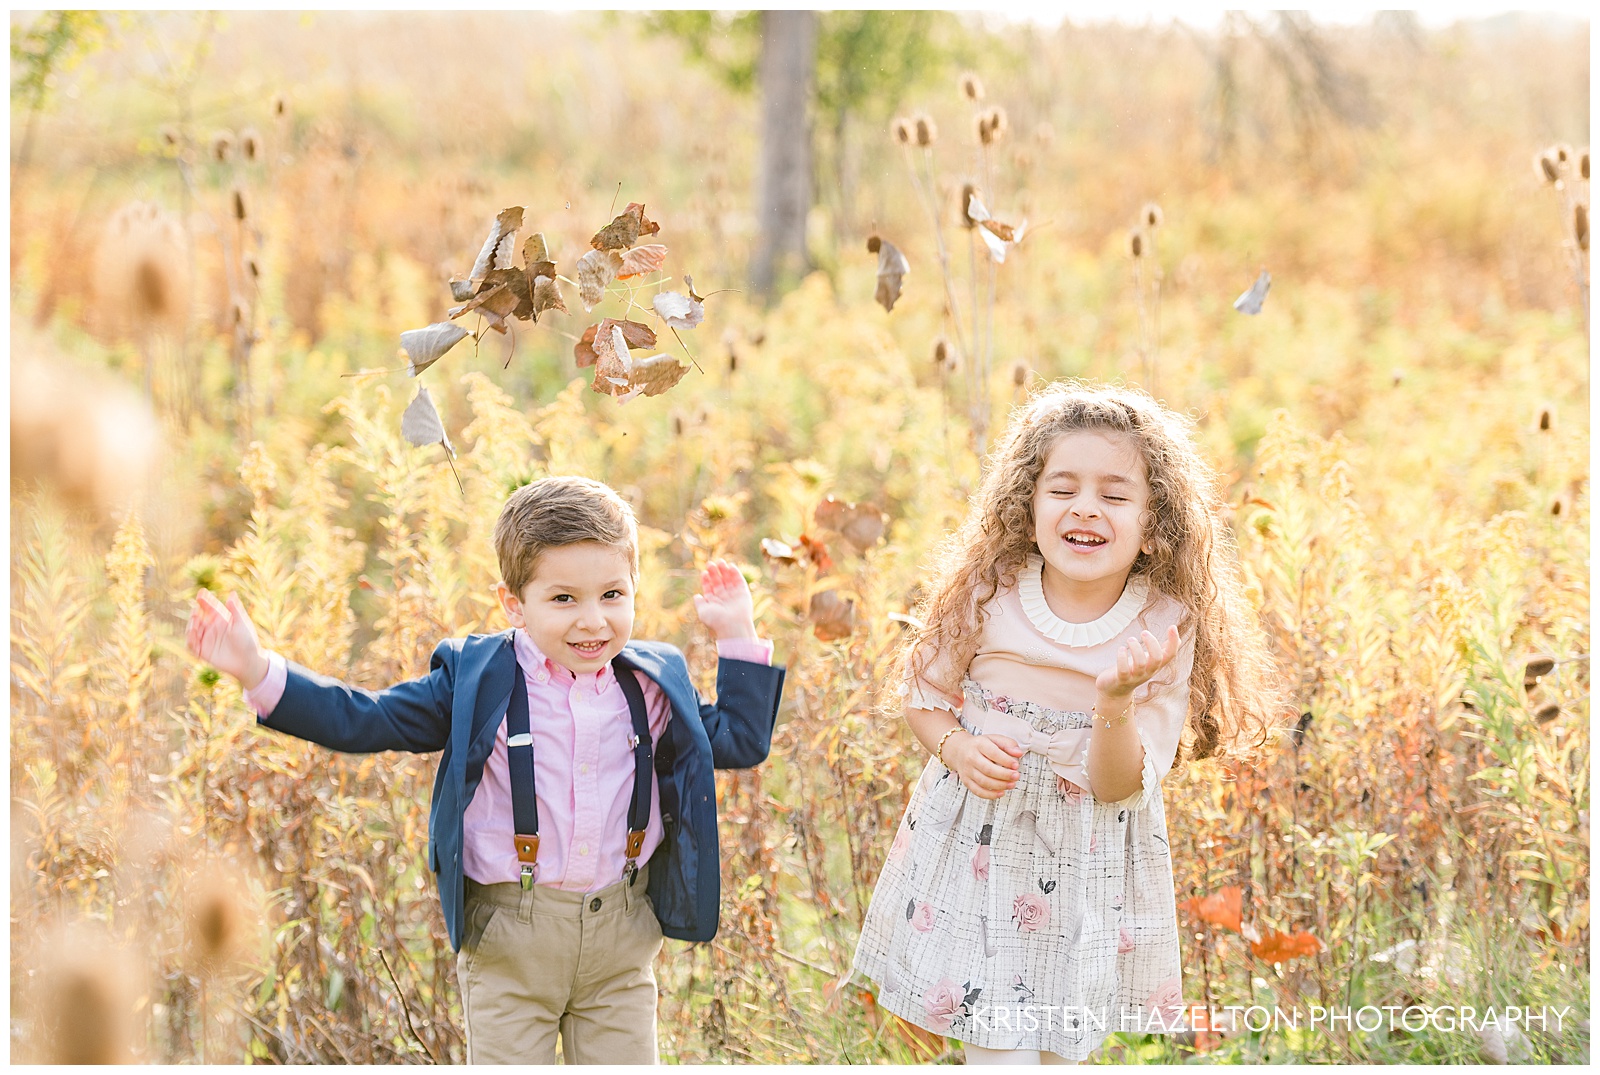 Portraits of a brother and sister throwing leaves in the air